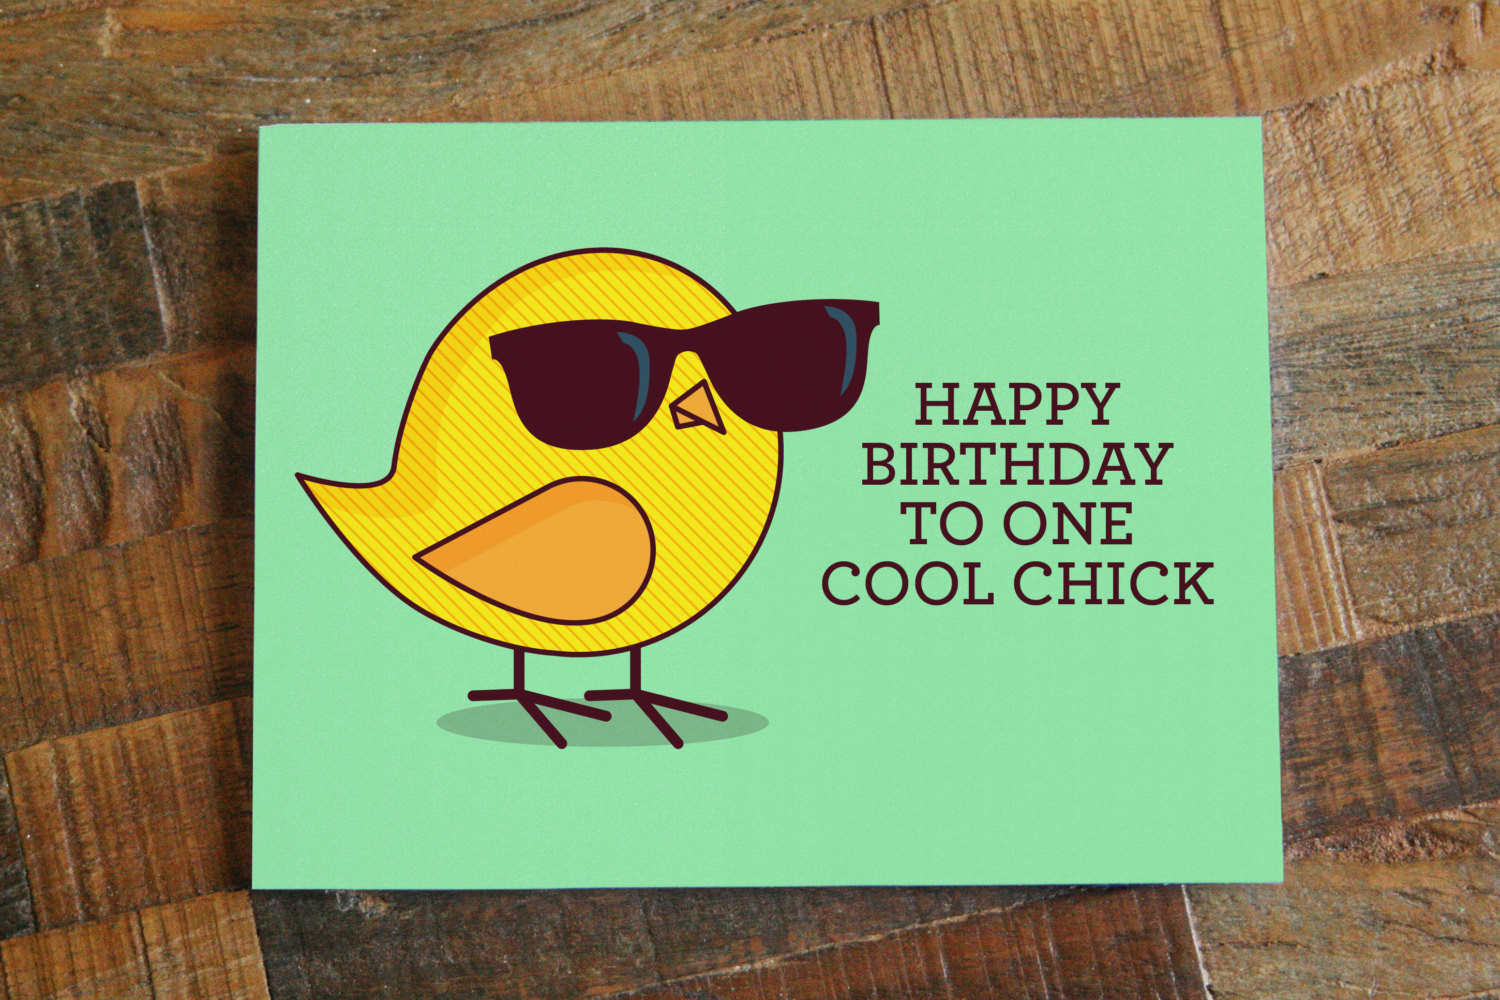 Funny Birthday Card Pictures
 Funny Birthday Card For Her "Happy Birthday to e Cool